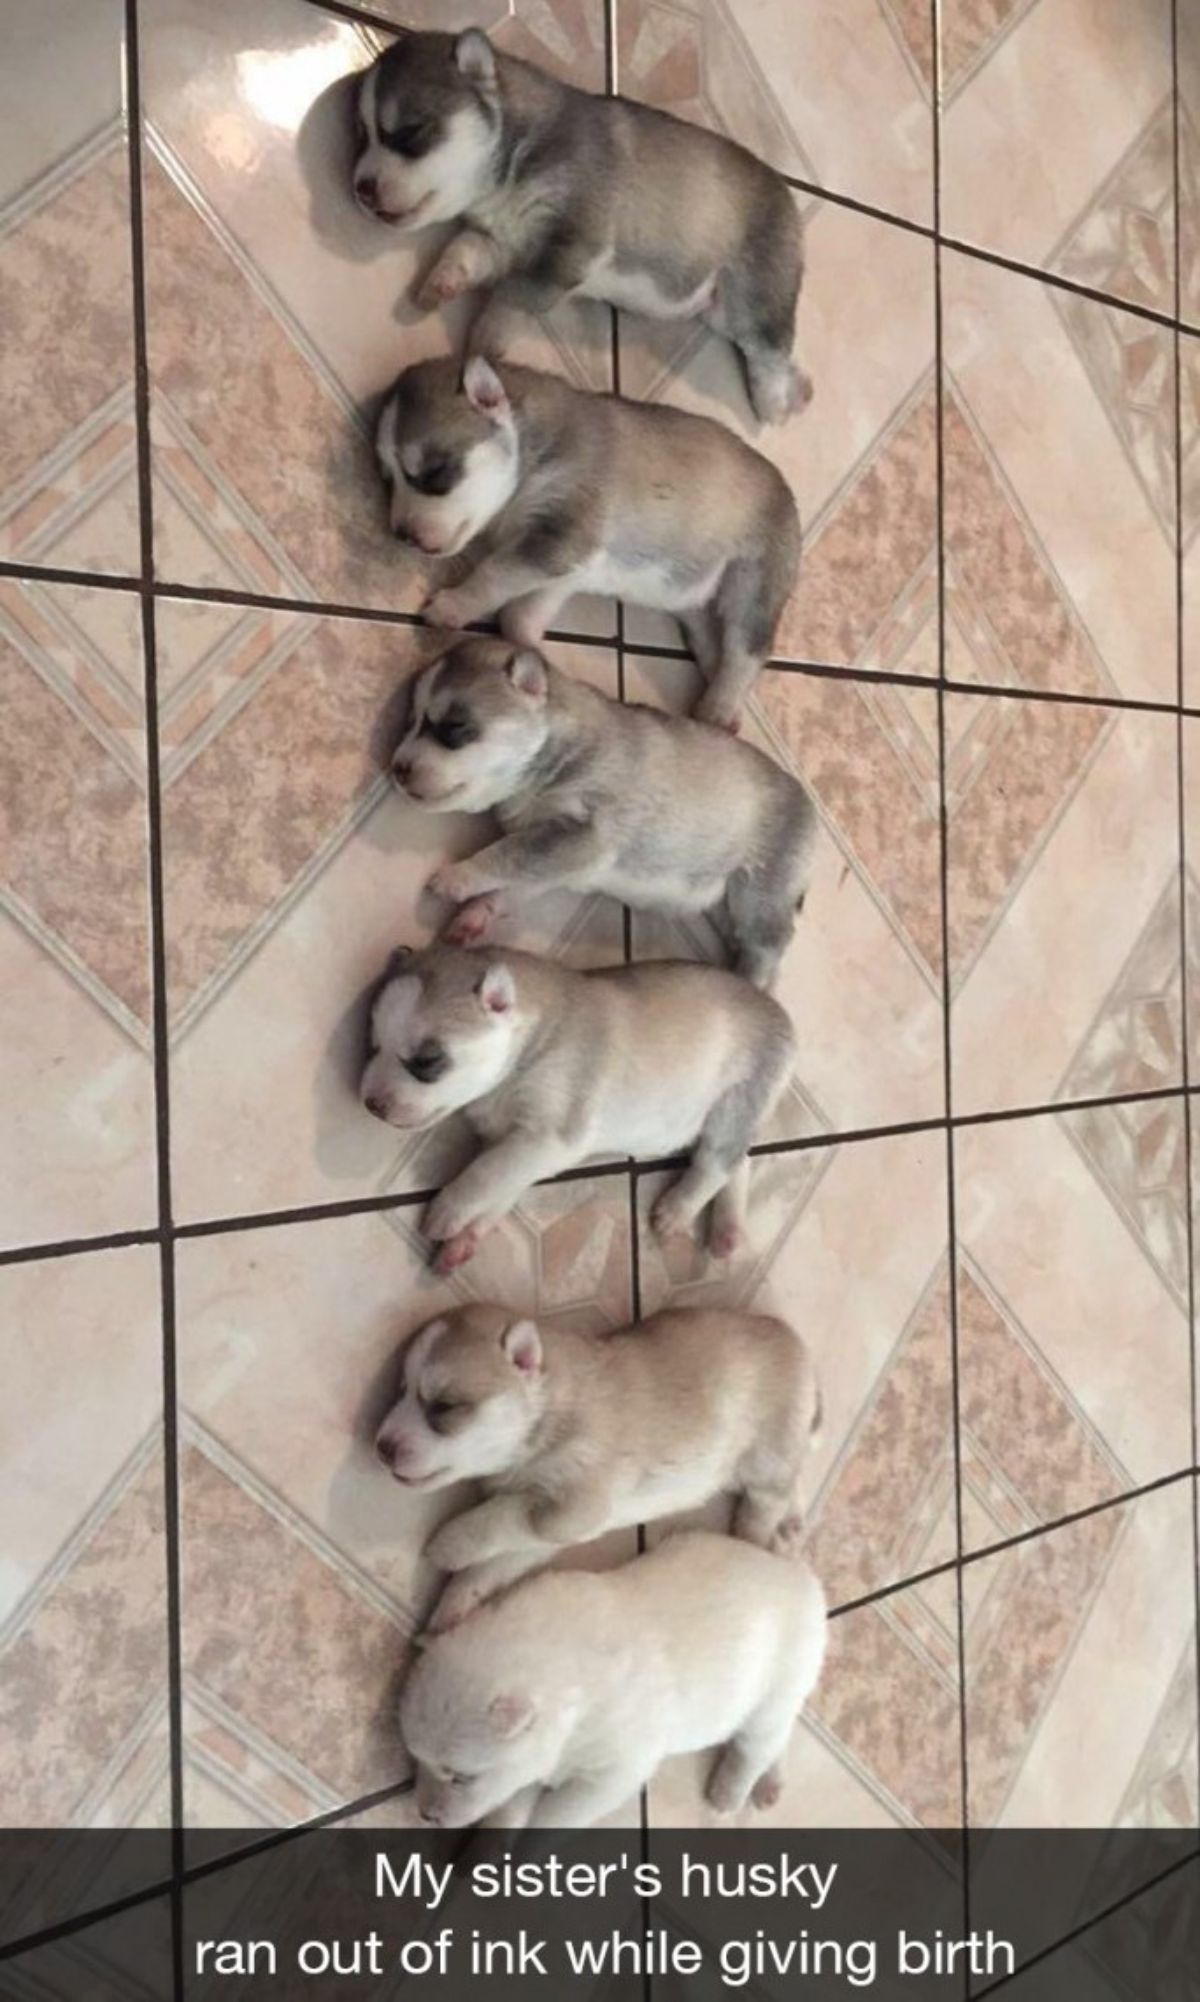 6 husky puppies sleeping in a row on the floor arraned according to colour with the caption My sister's husky ran out of ink while giving birth